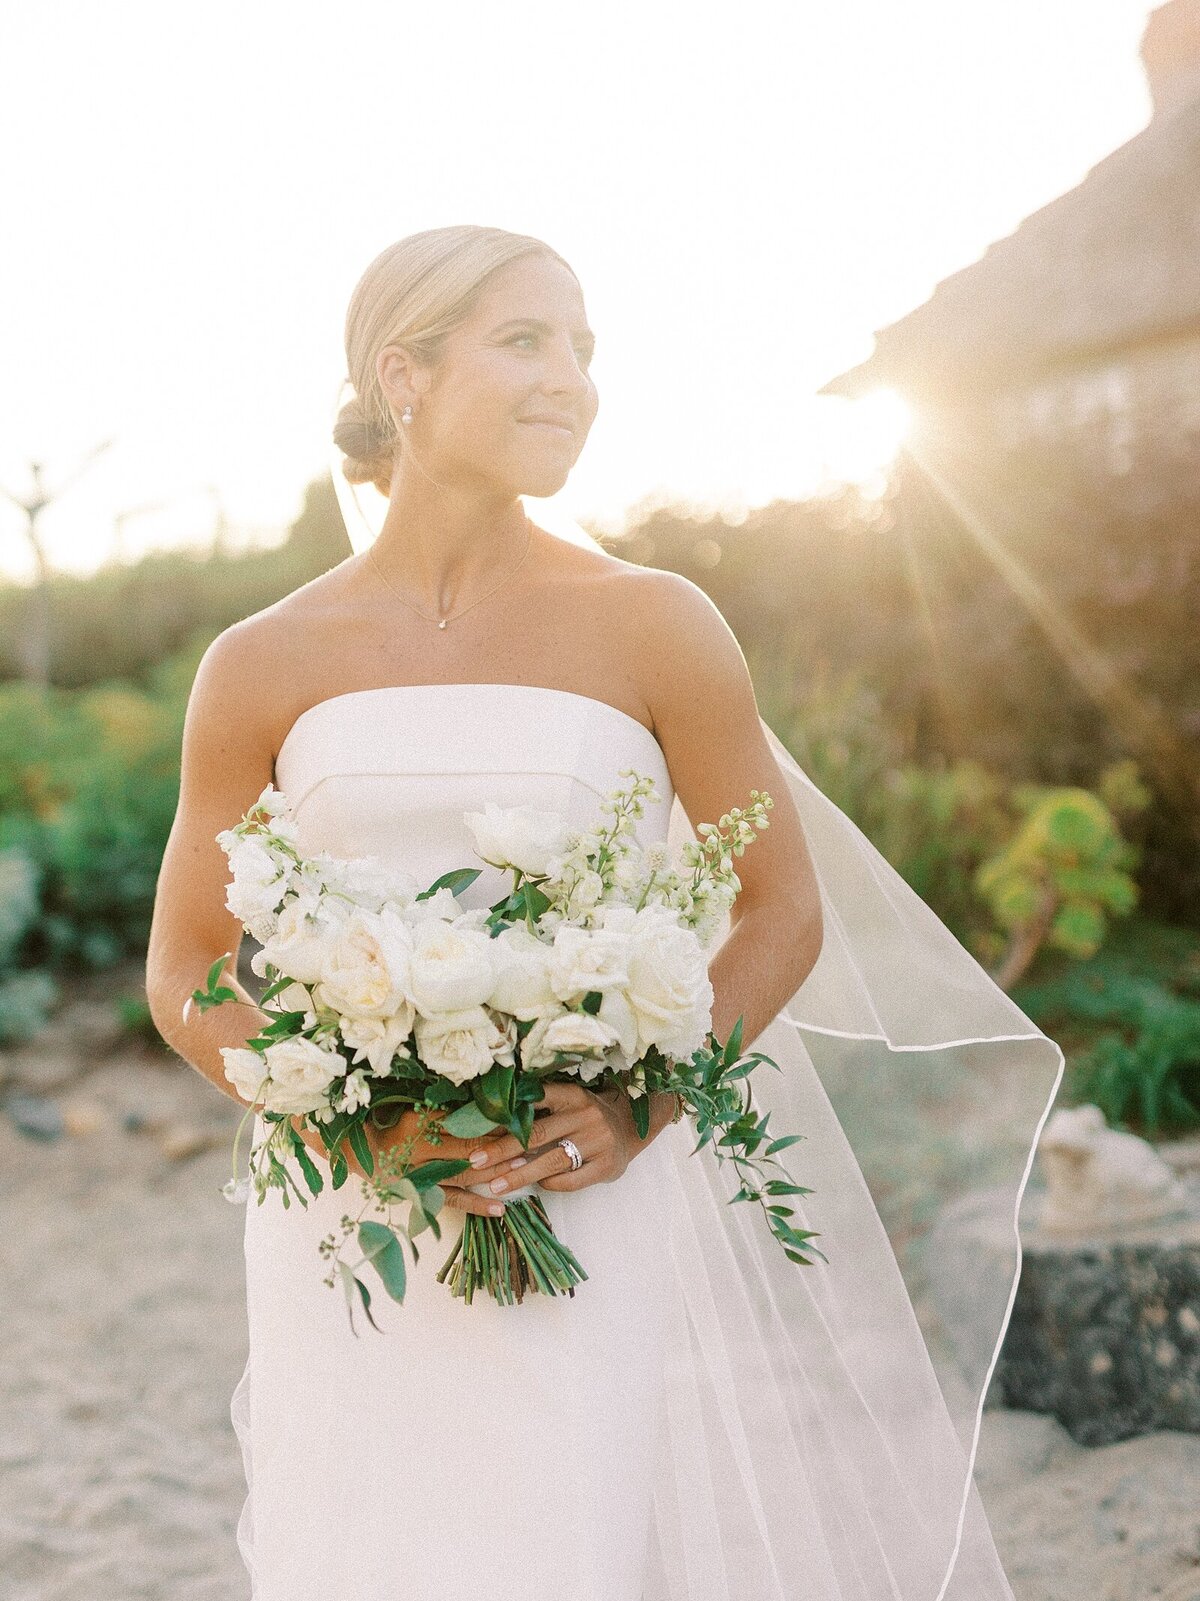 St. Malo Oceanside, California private residence wedding by Lisa Riley Photography.